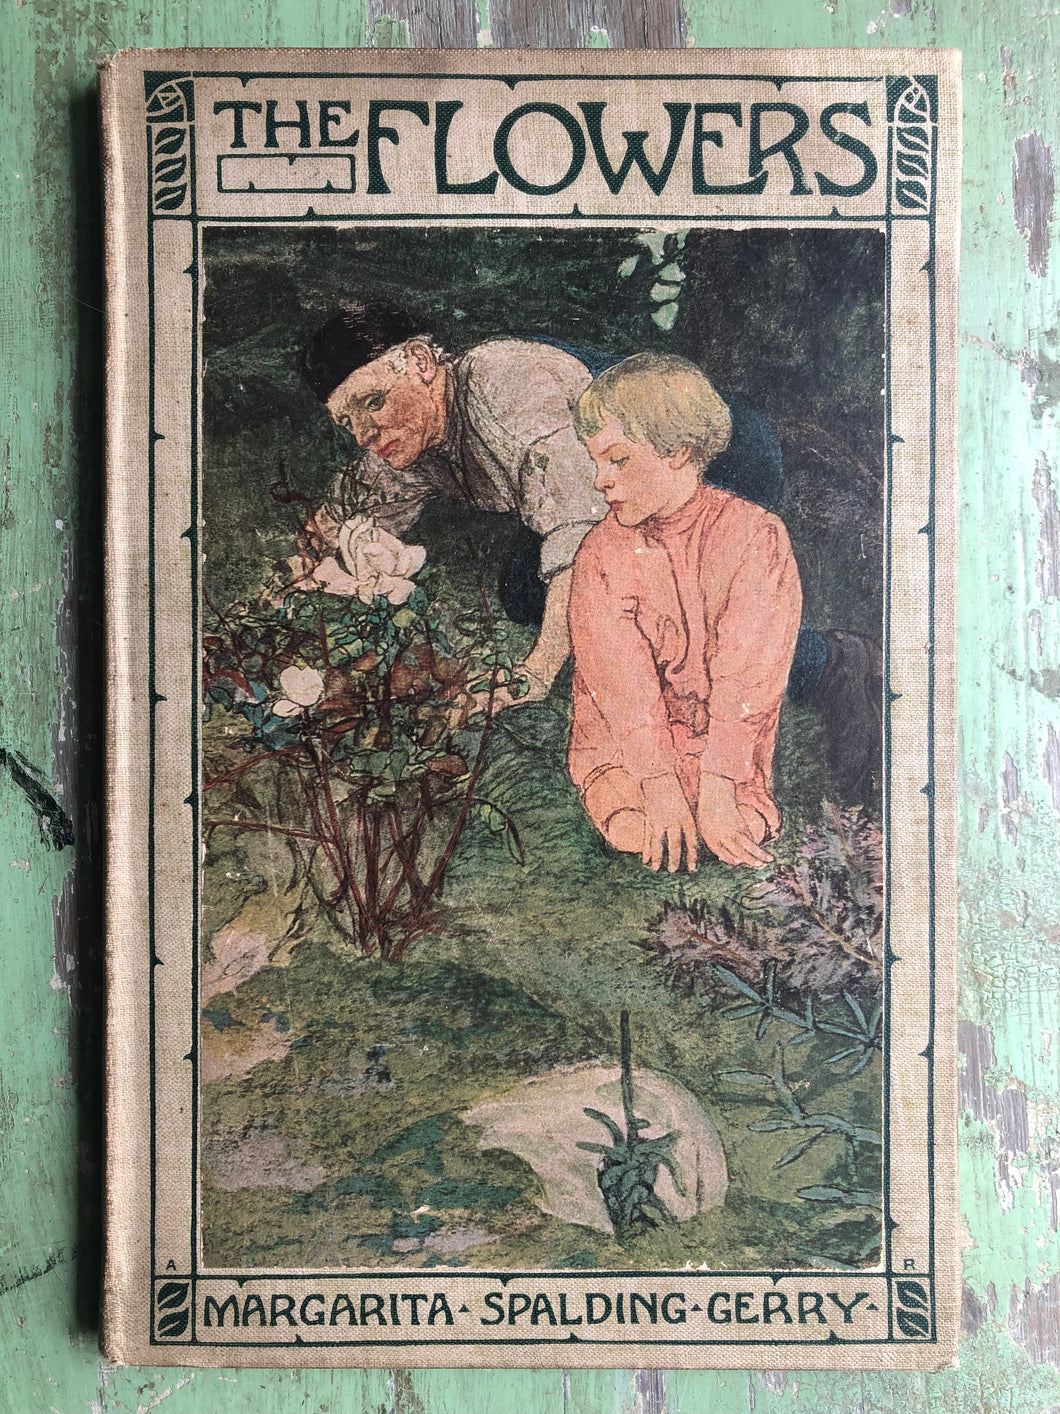 The Flowers by Margarita Spalding Gerry with illustrations by Elizabeth Shippen Green